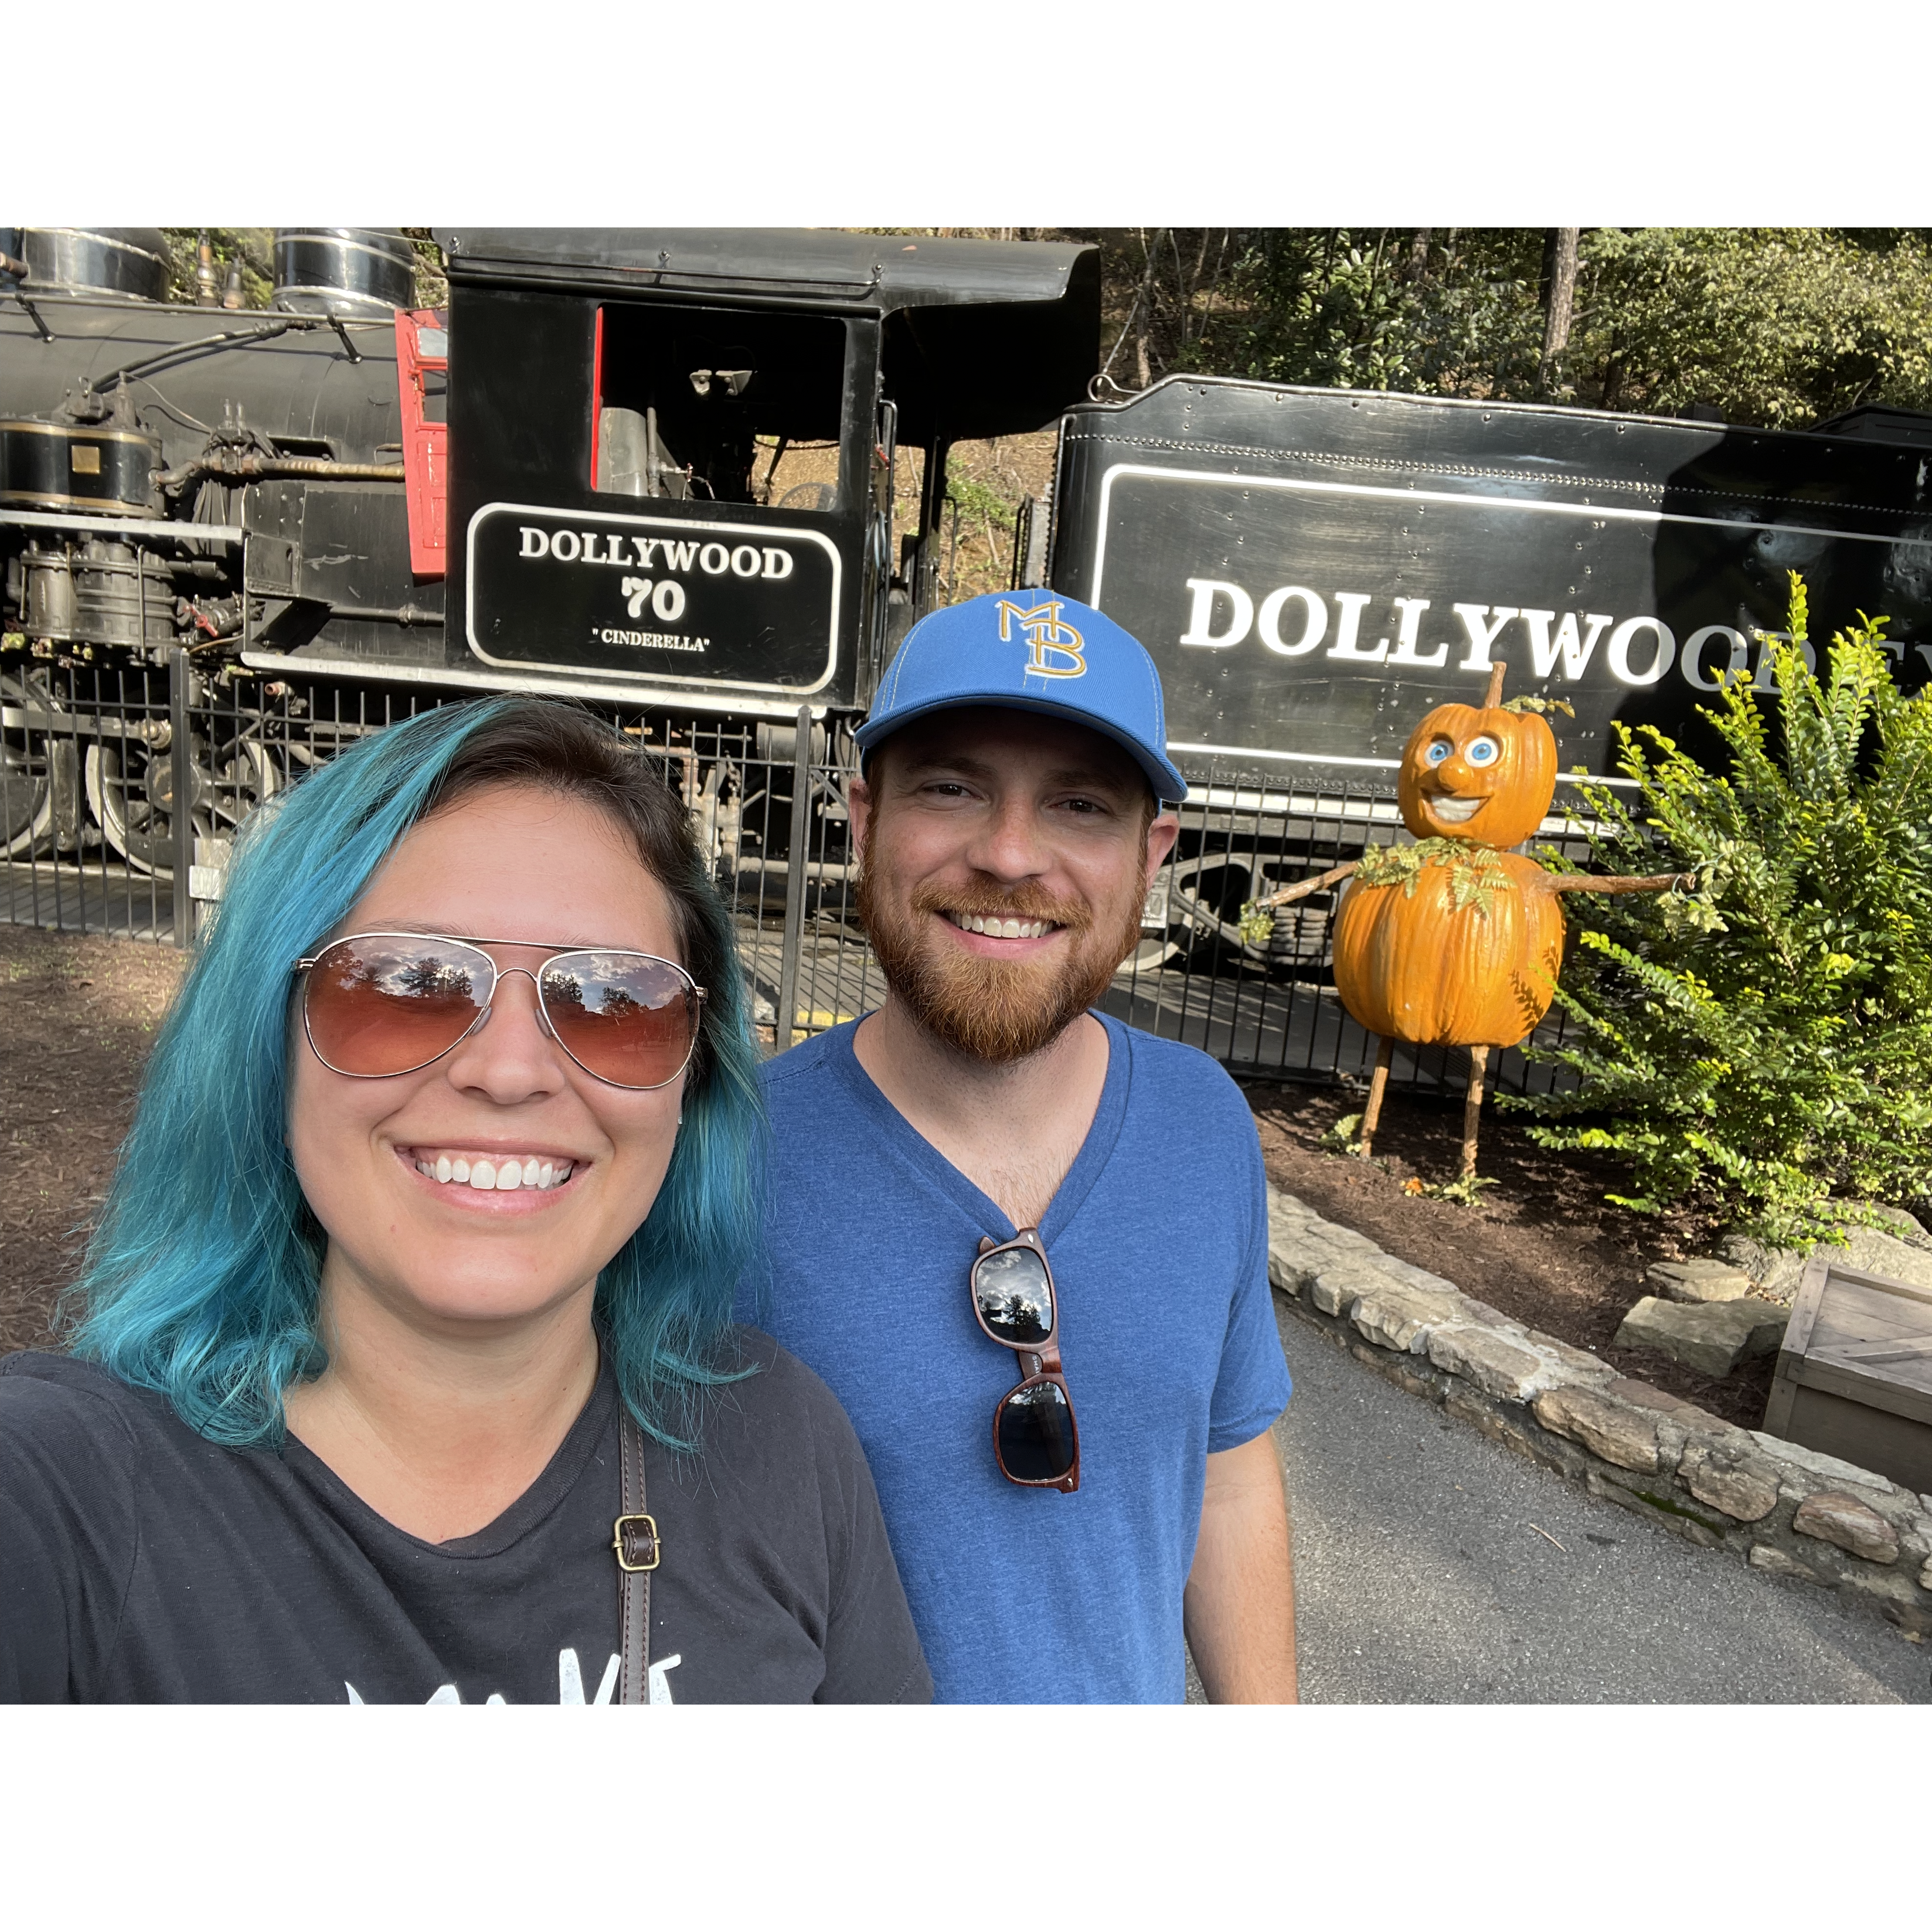 His first trip to Dollywood